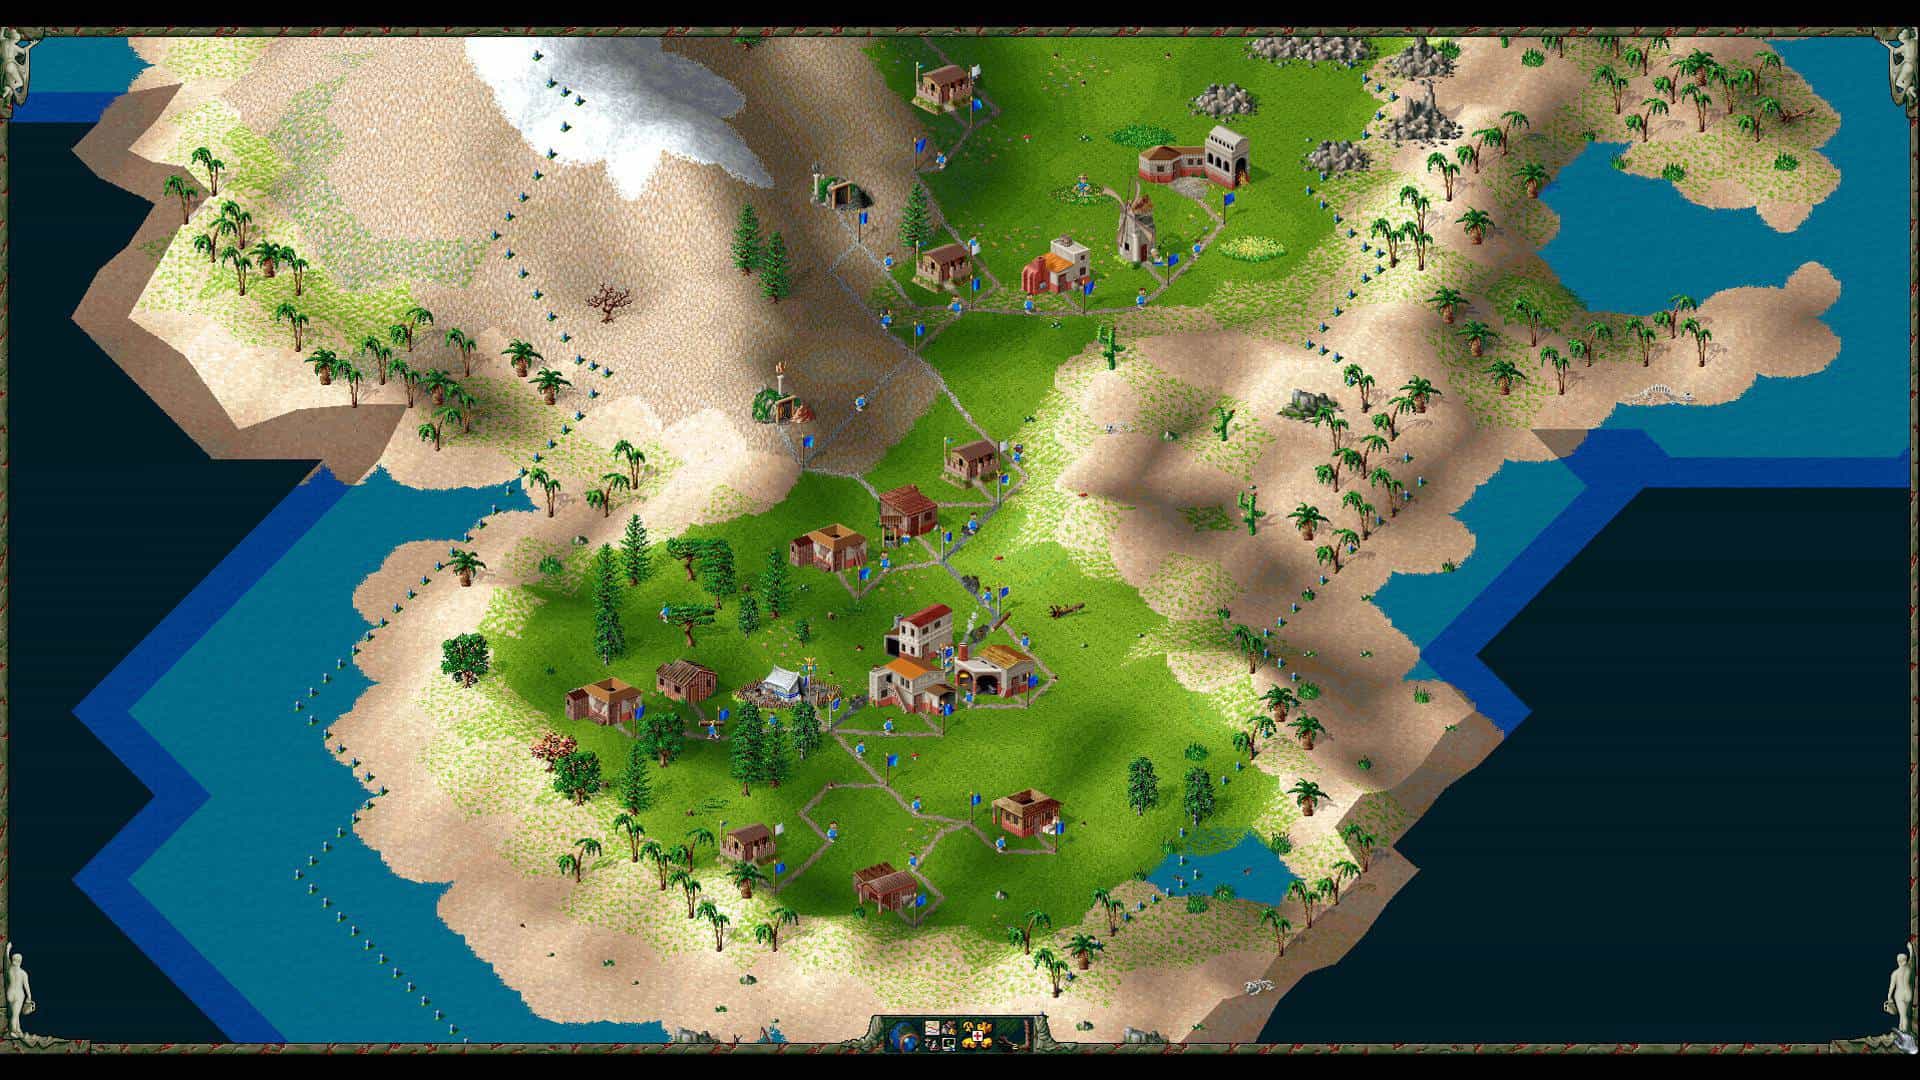 TheSettlers2 HE Screenshot 1 181115 4pm CET 1542216903